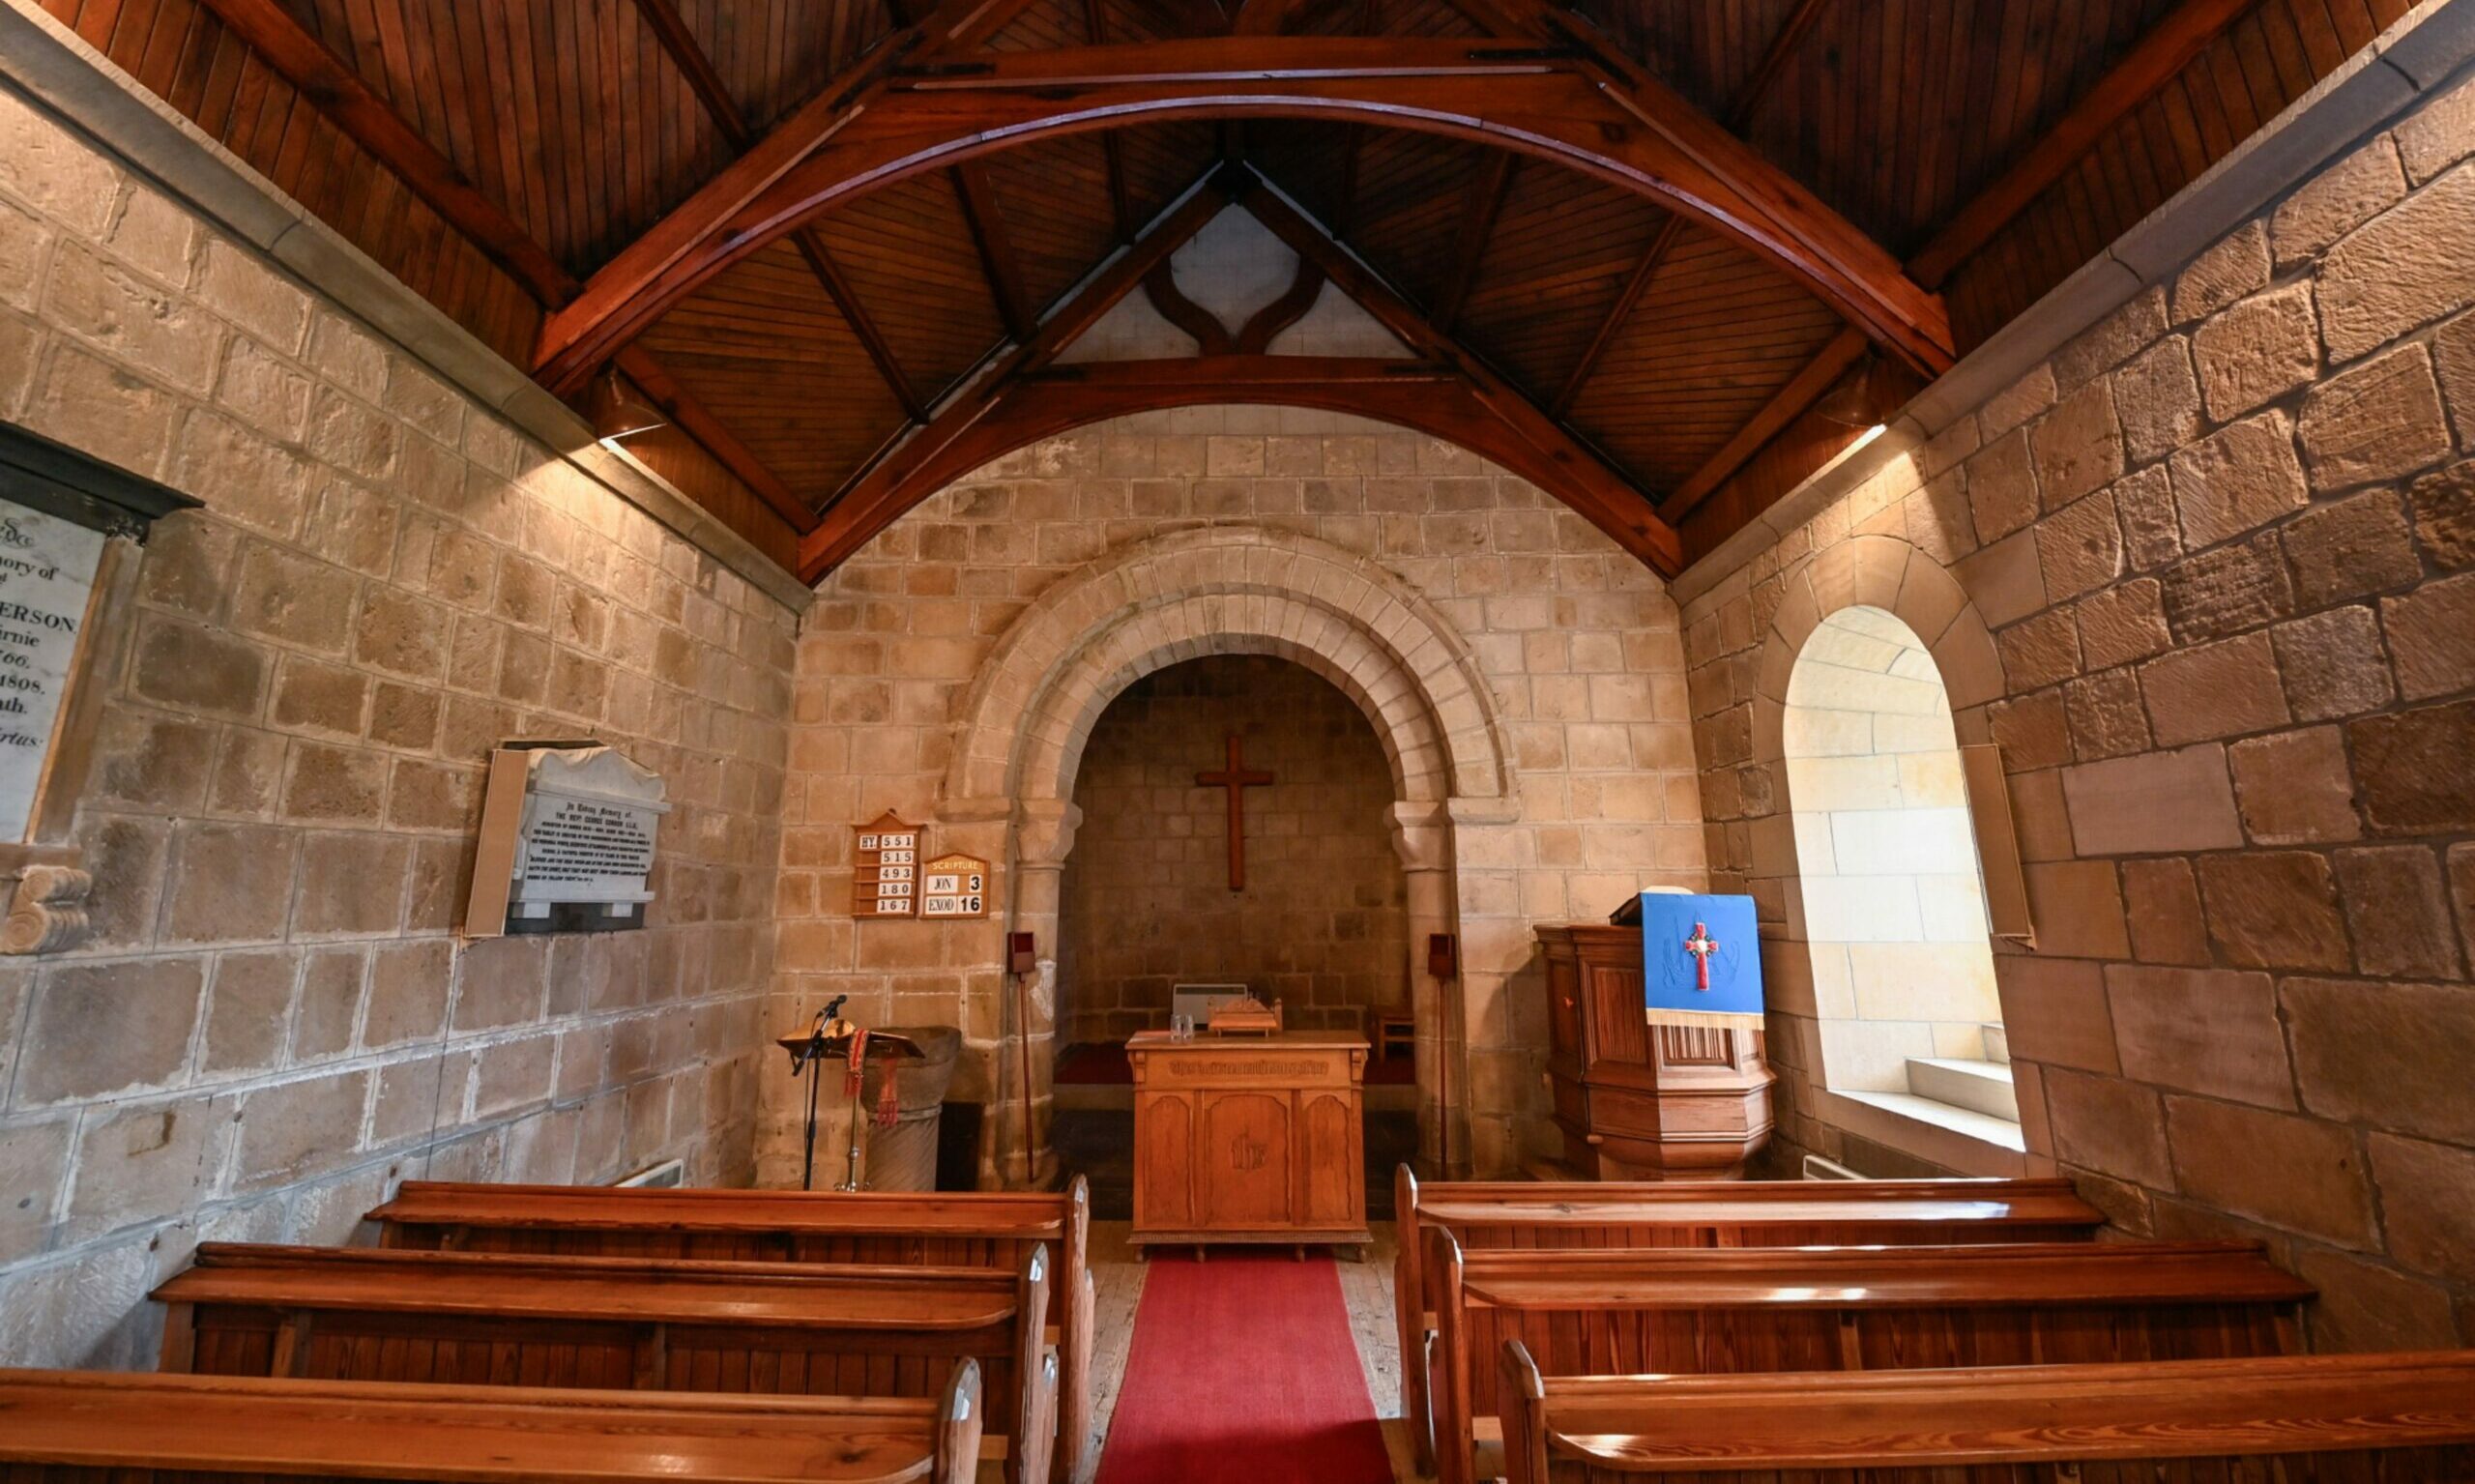 Looking from rear of Birnie Kirk to alter under stone arch.